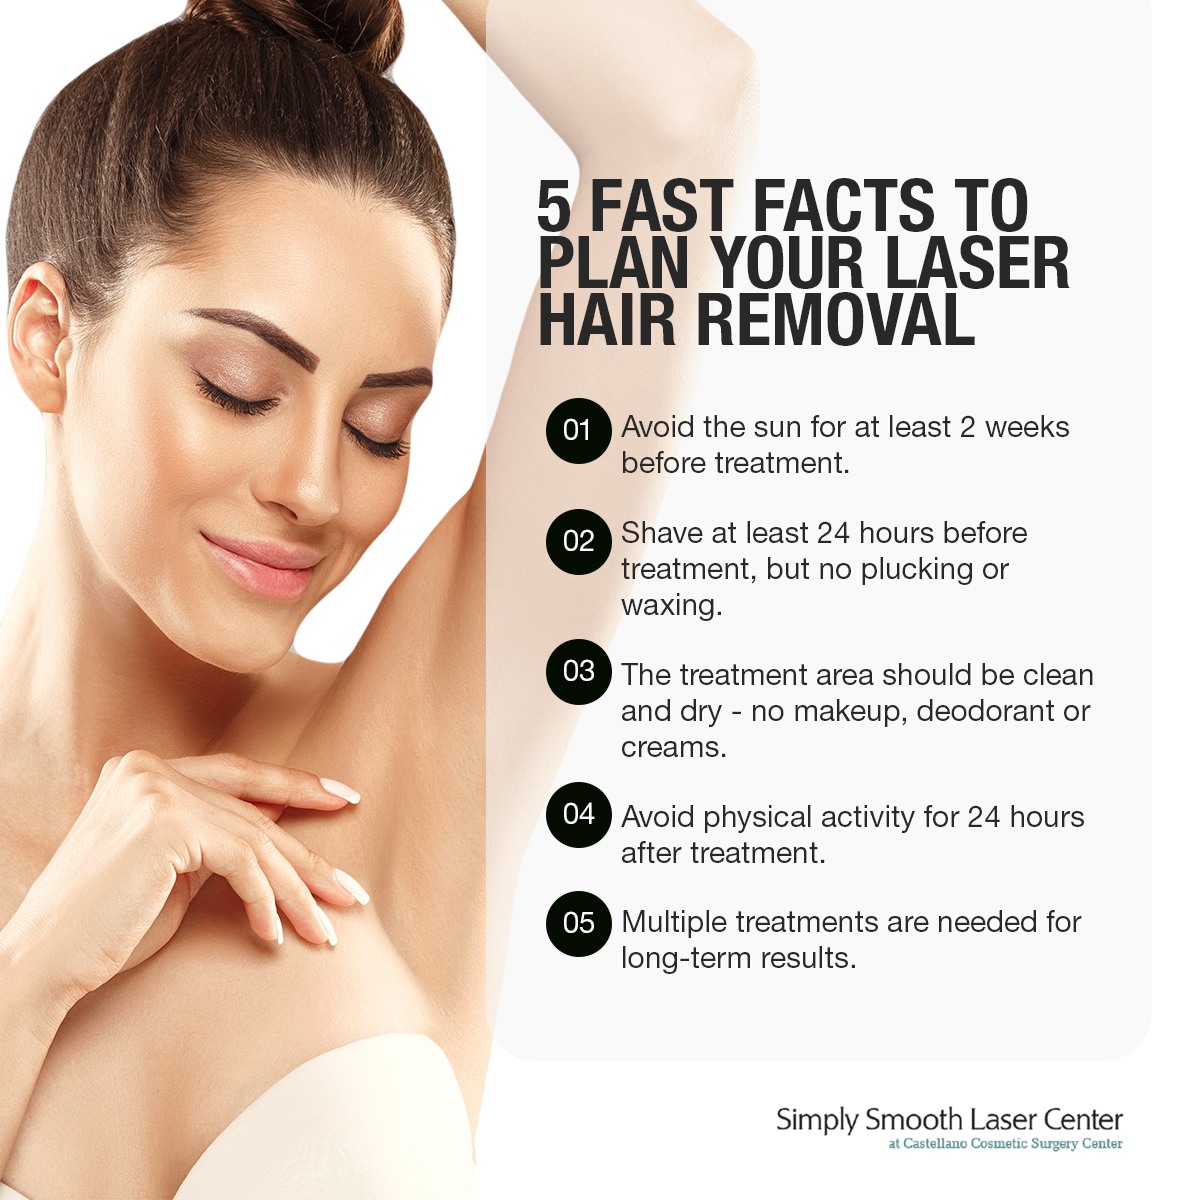 5 Fast Facts to Plan Your Laser Hair Removal